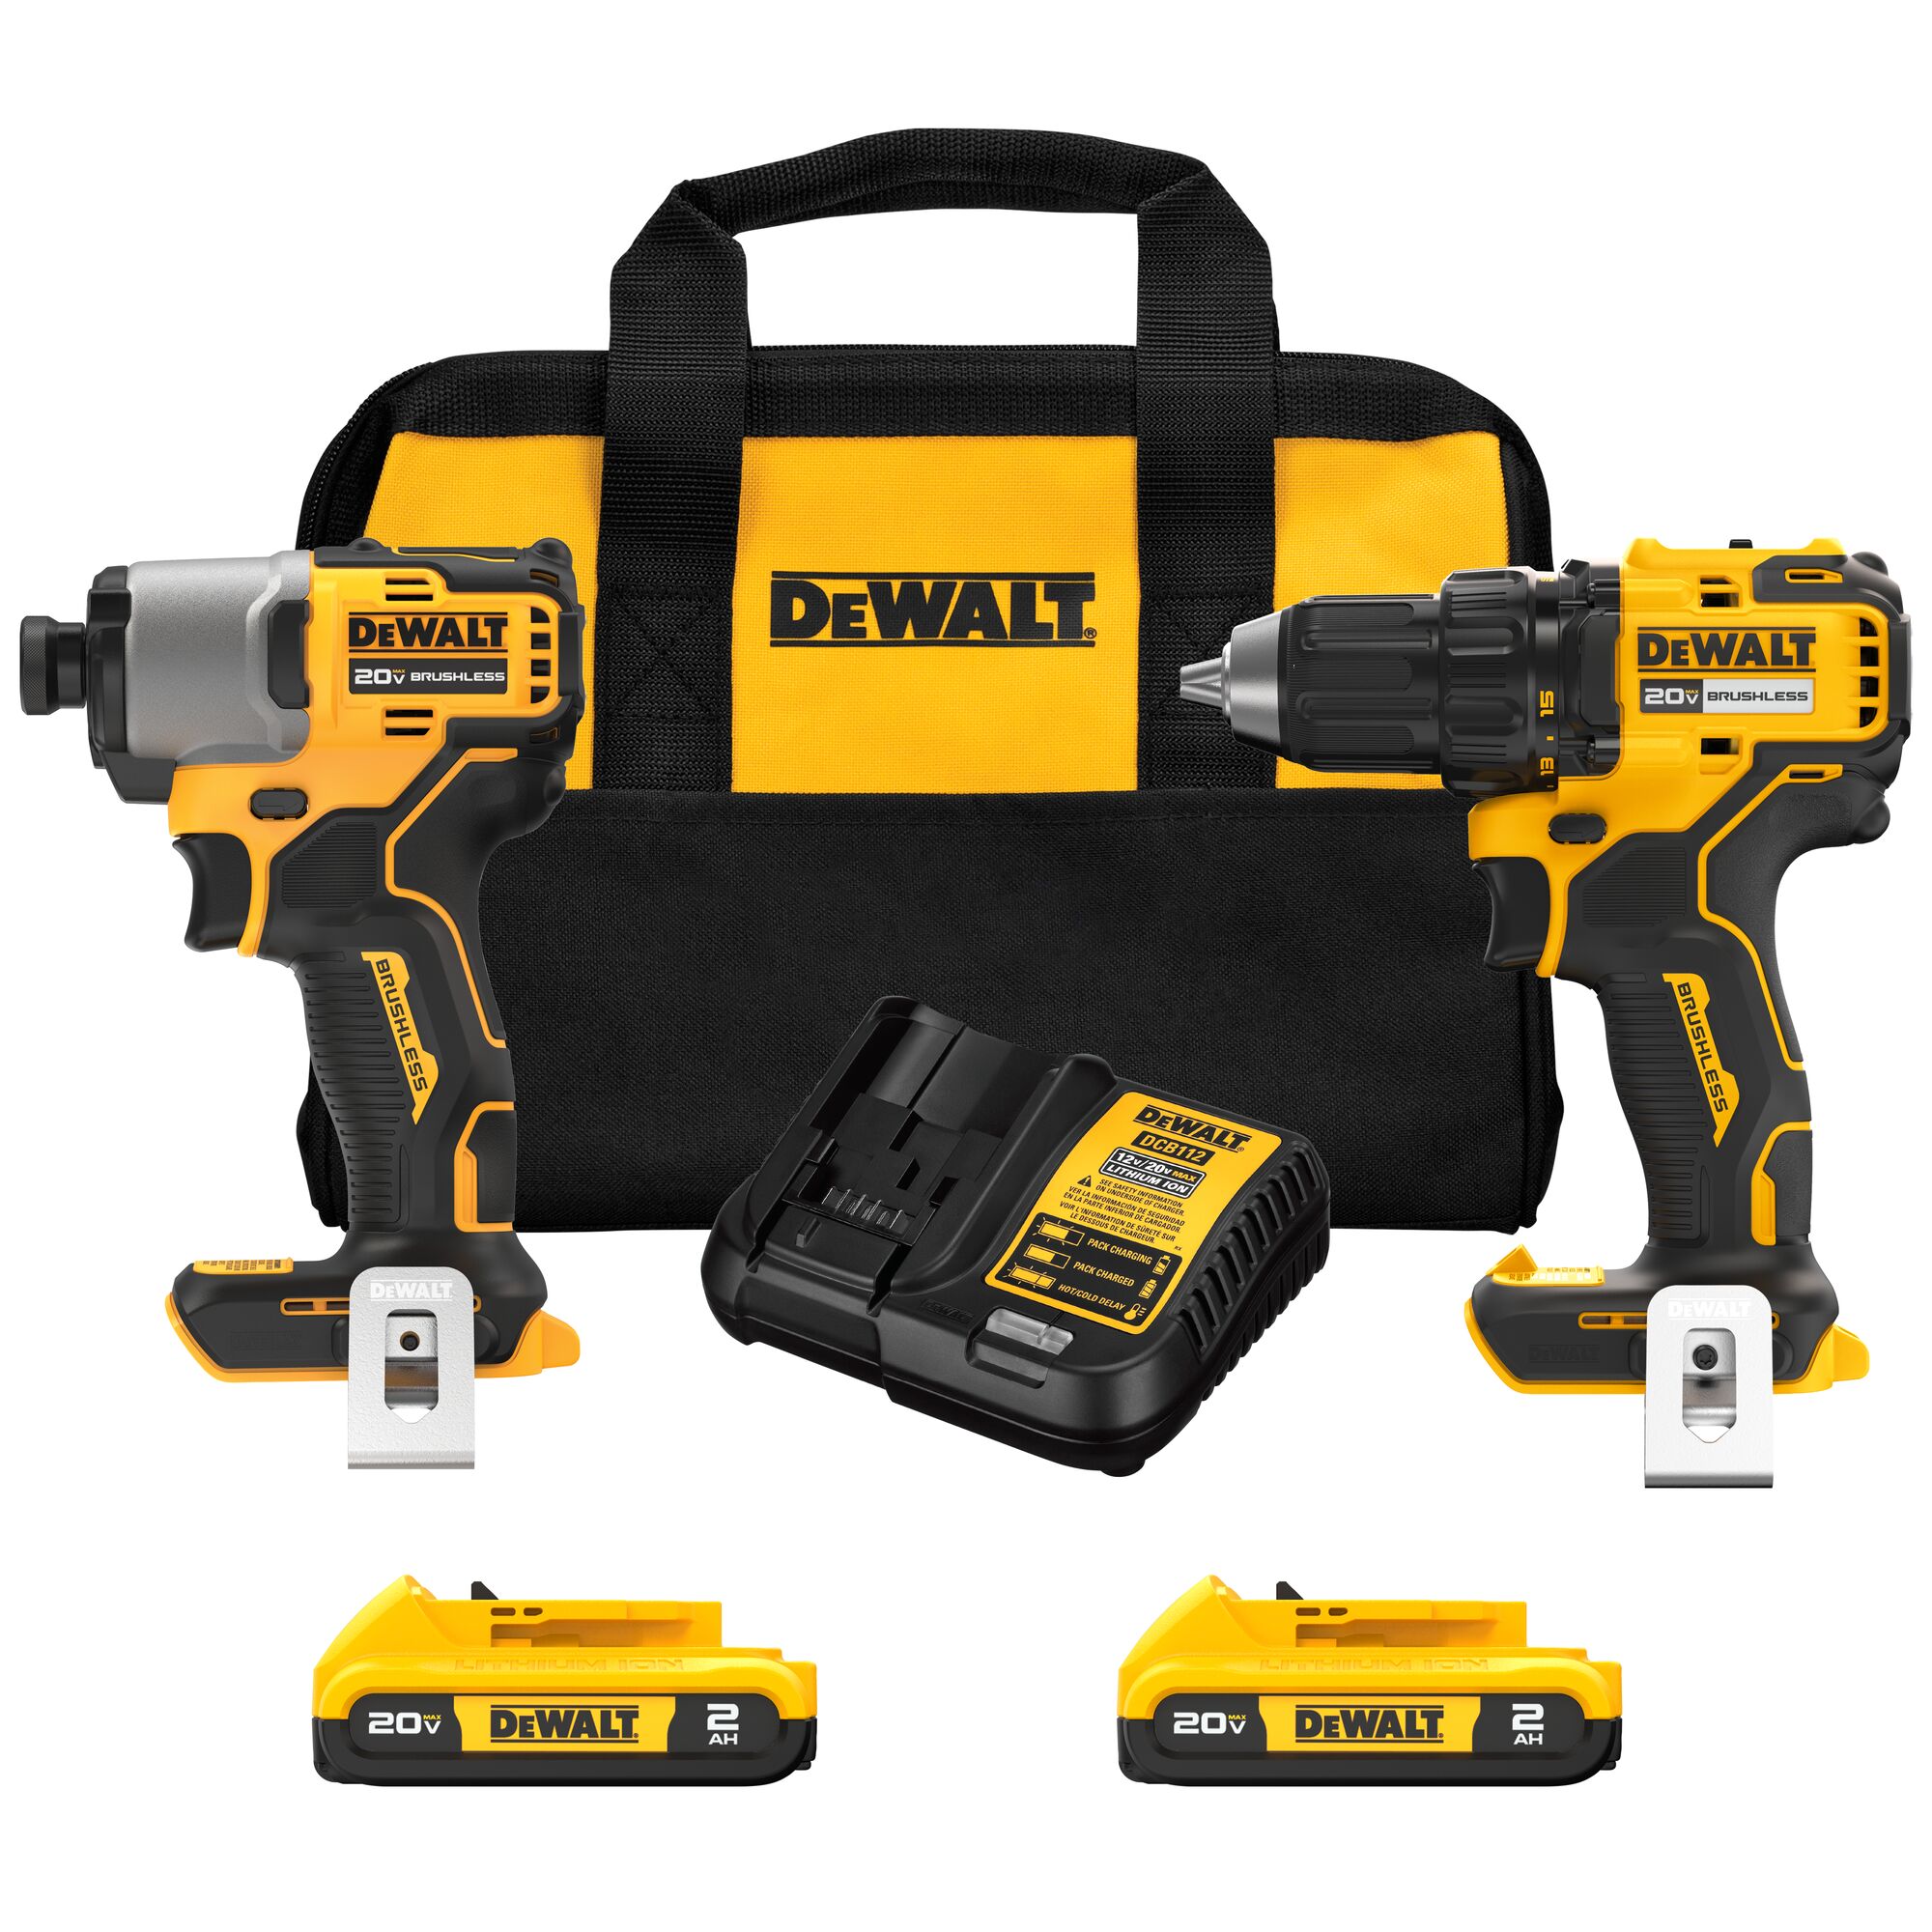 DEWALT DW 20V 2-Tool Combo in Power Tool Kits department at Lowes.com